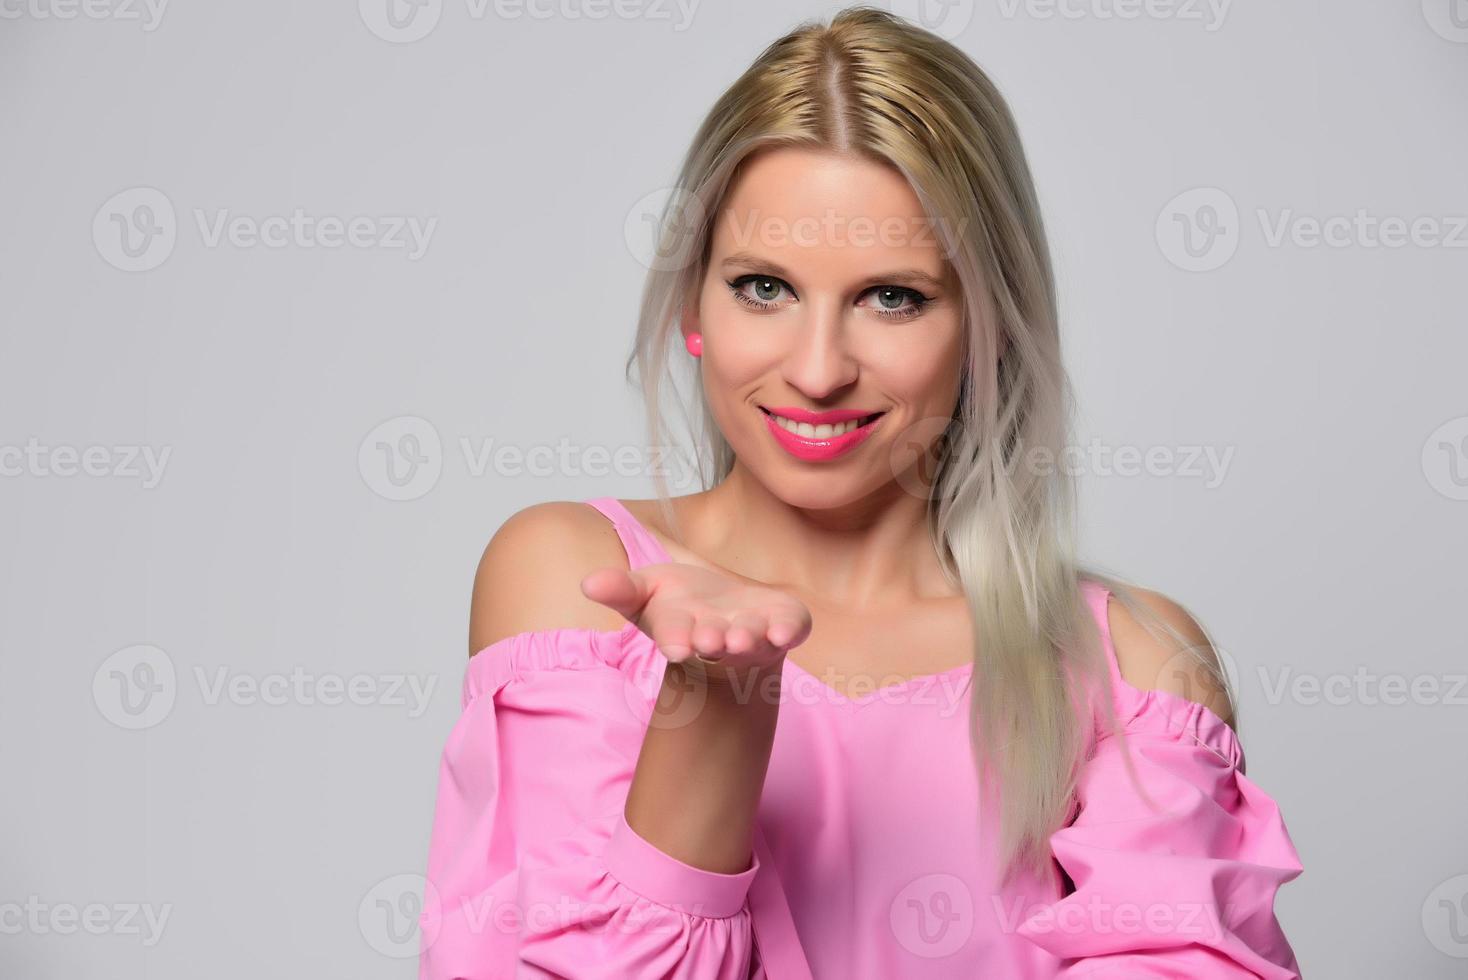 Portrait of beautiful young woman in cute pink shirt and blue jeans posing in studio. Concept of beauty, emotions, facial expression, lifestyle, fashion, youth culture photo